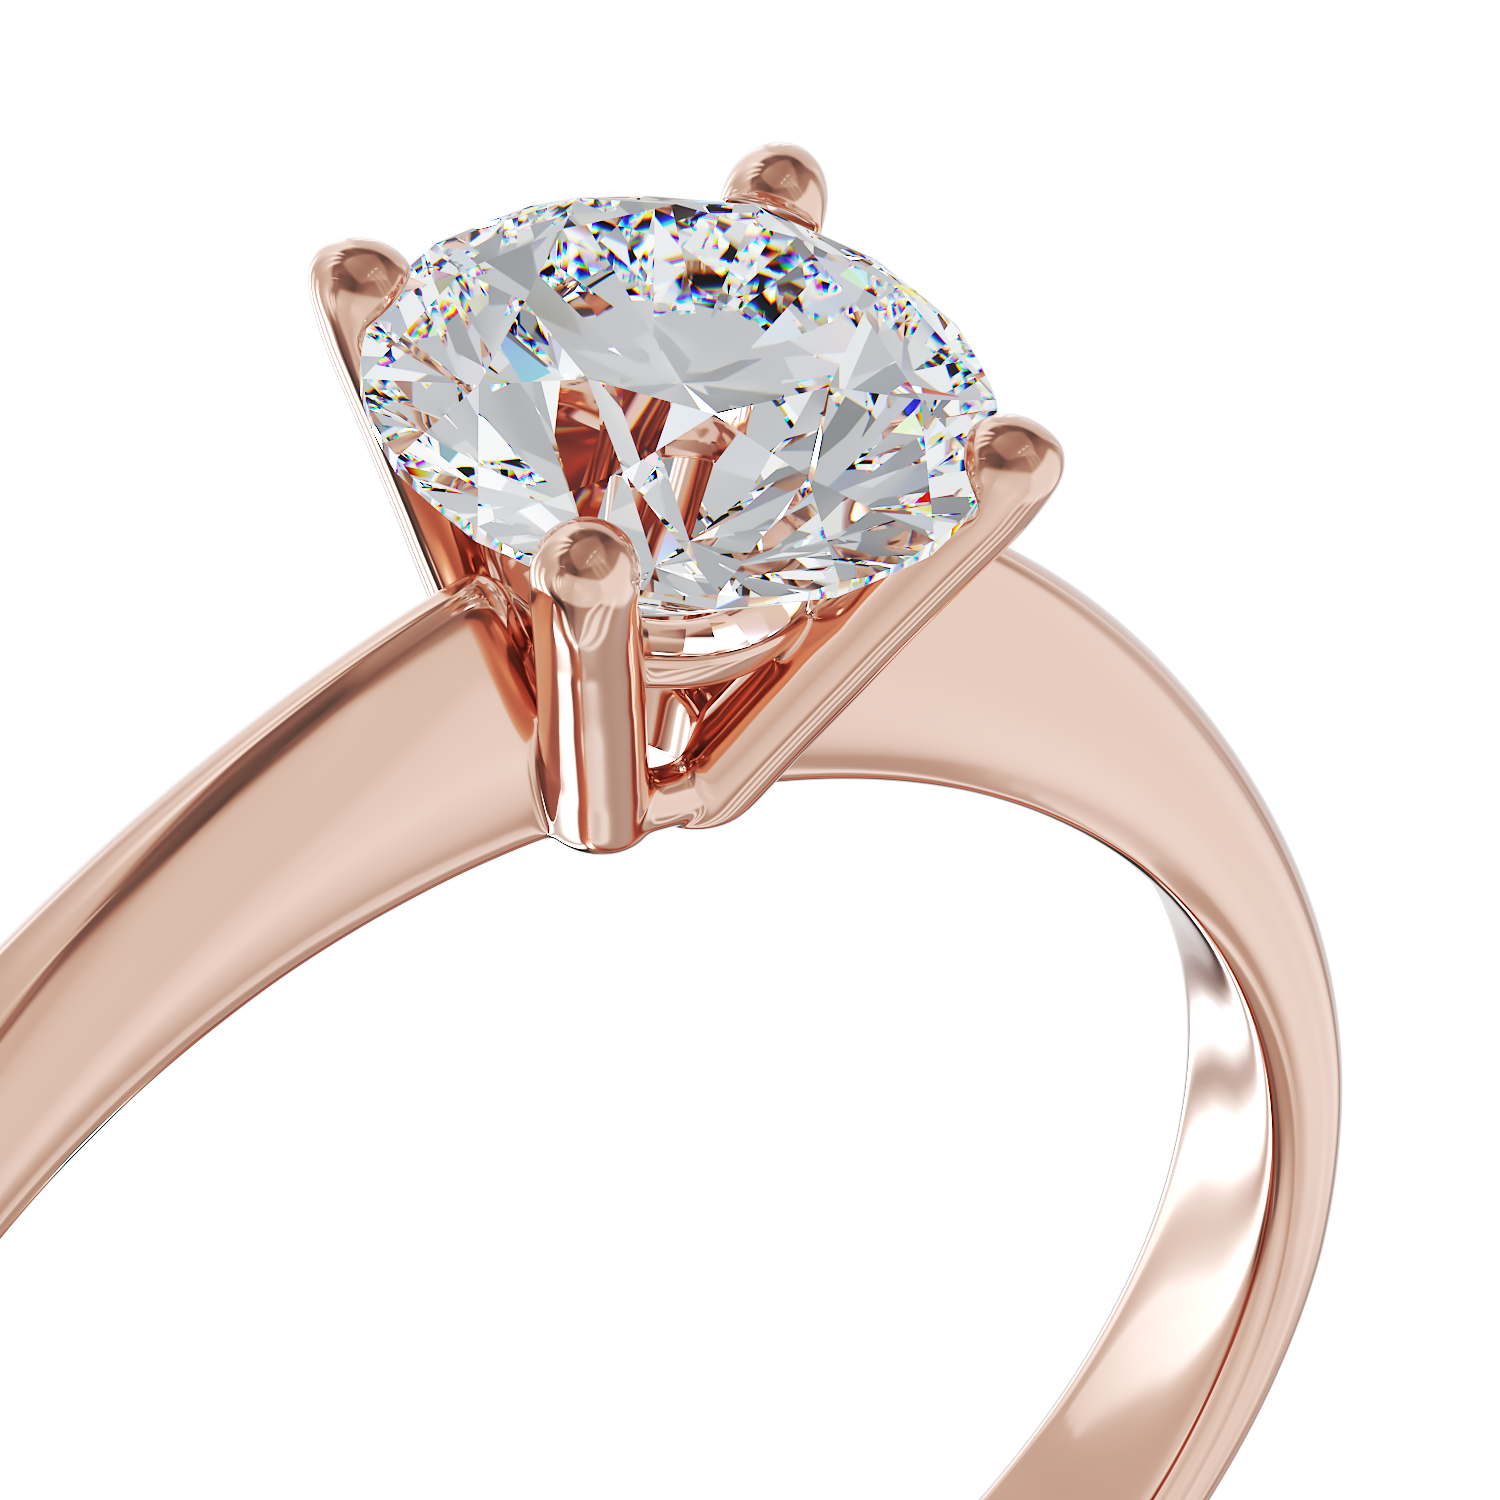 18K rose gold engagement ring with a 1.26ct solitaire diamond